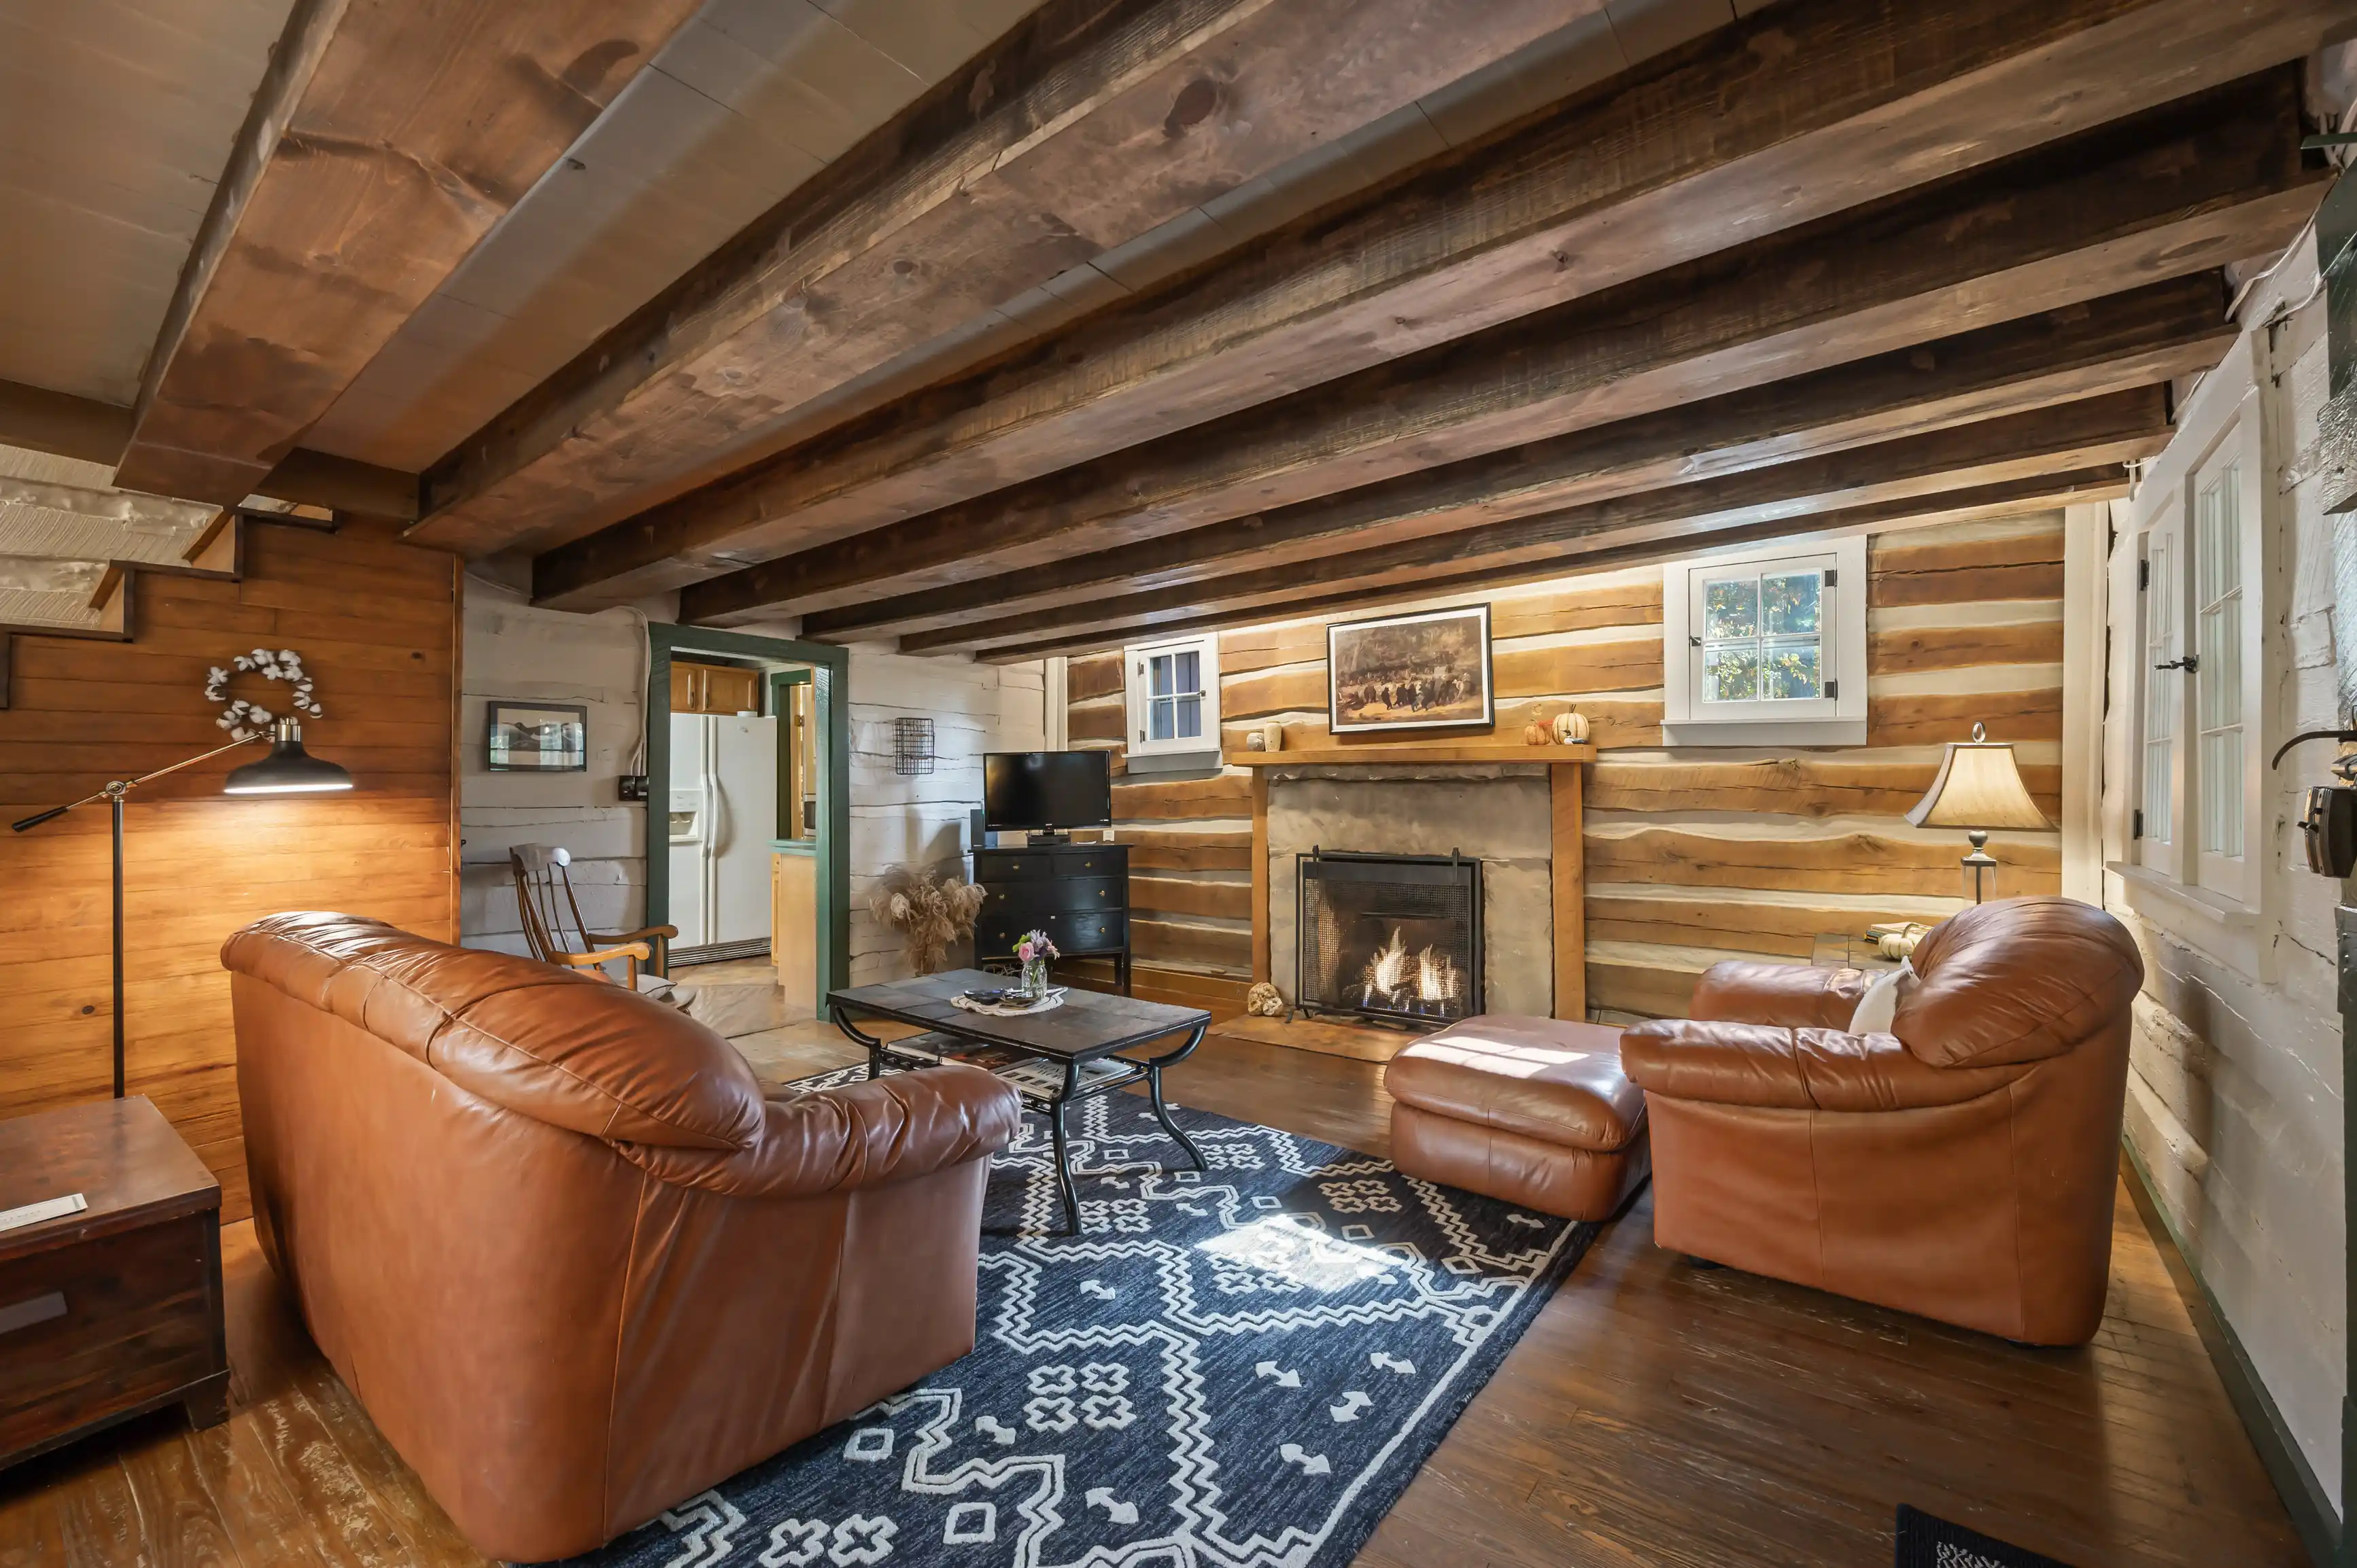 Cozy rustic living room interior with a fireplace, leather armchairs, and wooden beams on the ceiling.